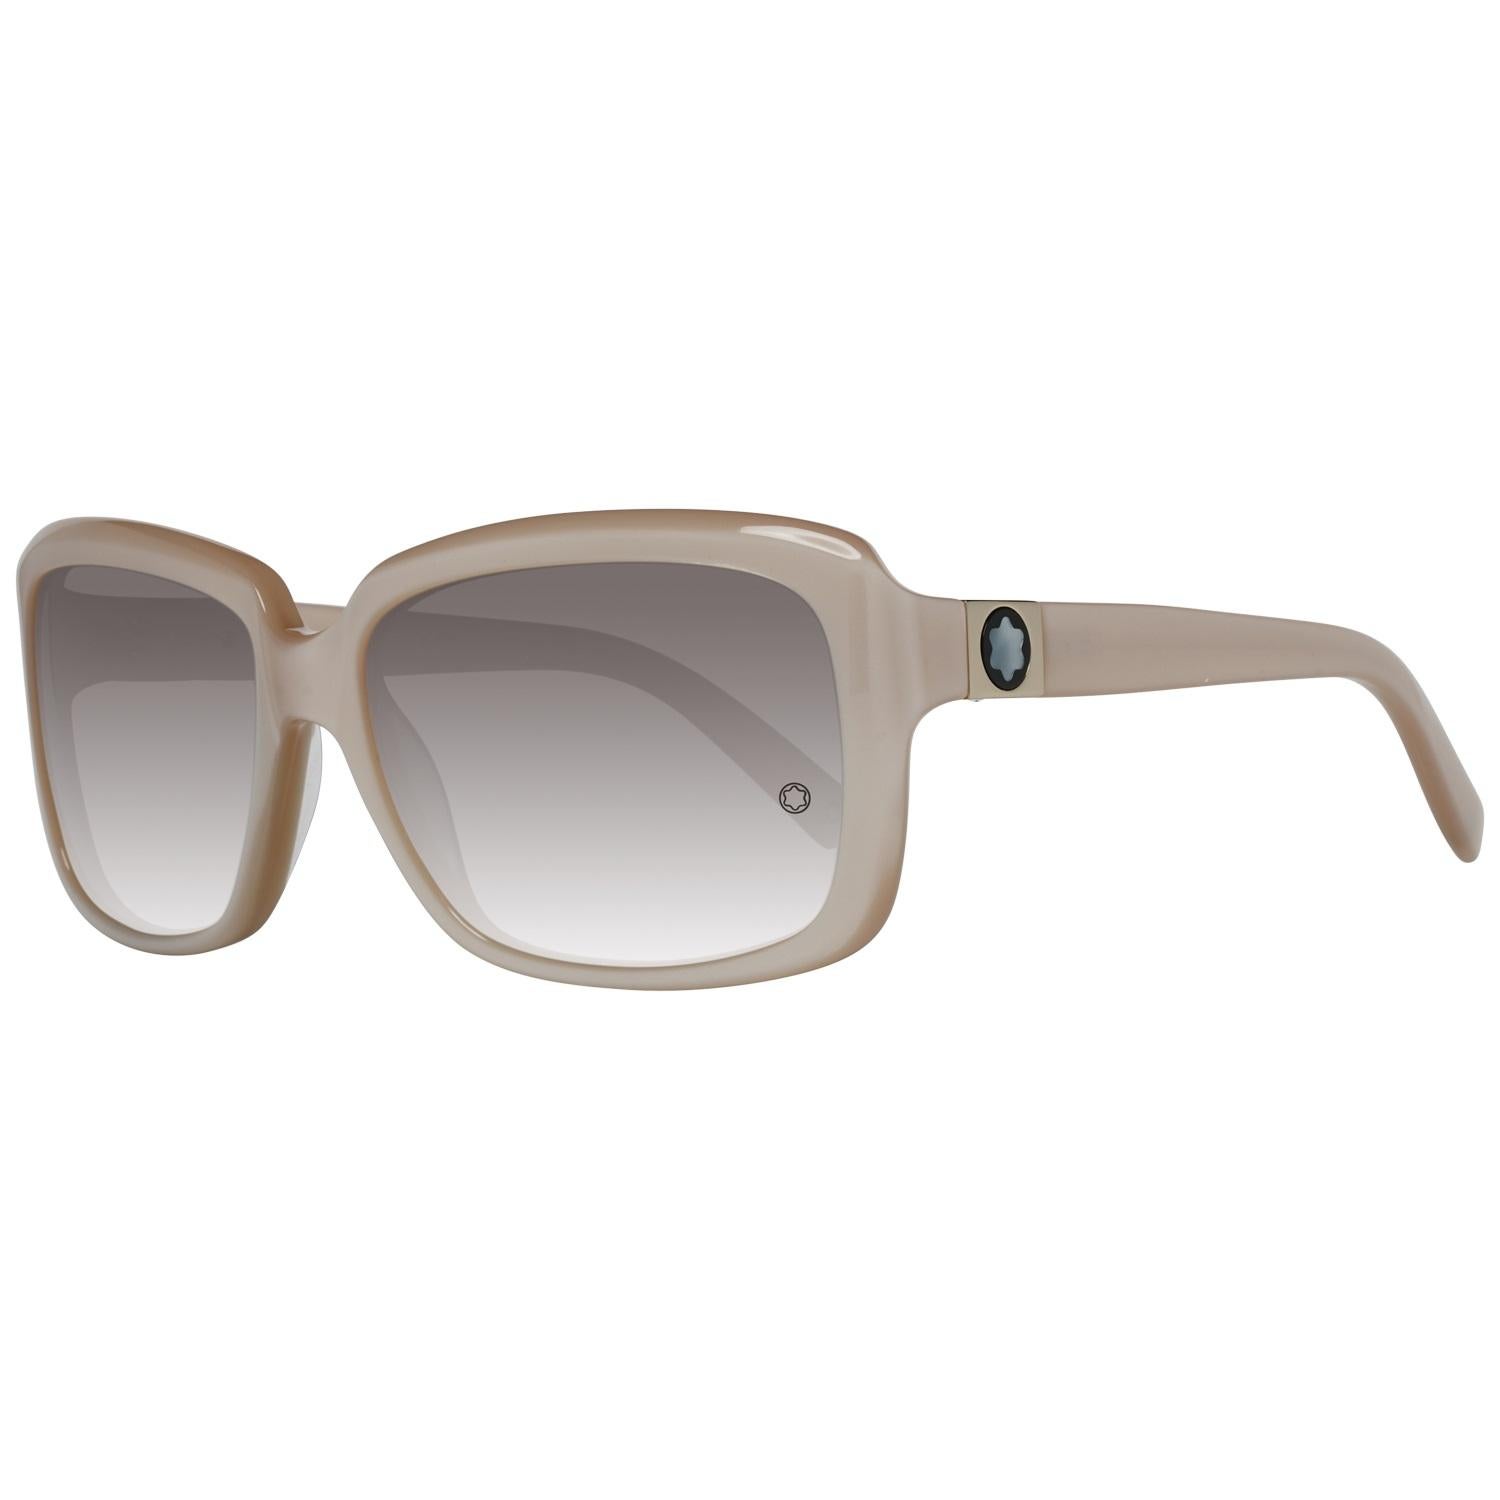 Details

MATERIAL: Acetate

COLOR: Beige

MODEL: MB466S 5974F

GENDER: Women

COUNTRY OF MANUFACTURE: Italy

TYPE: Sunglasses

ORIGINAL CASE?: Yes

STYLE: Butterfly

OCCASION: Casual

FEATURES: Lightweight

LENS COLOR: Grey

LENS TECHNOLOGY: